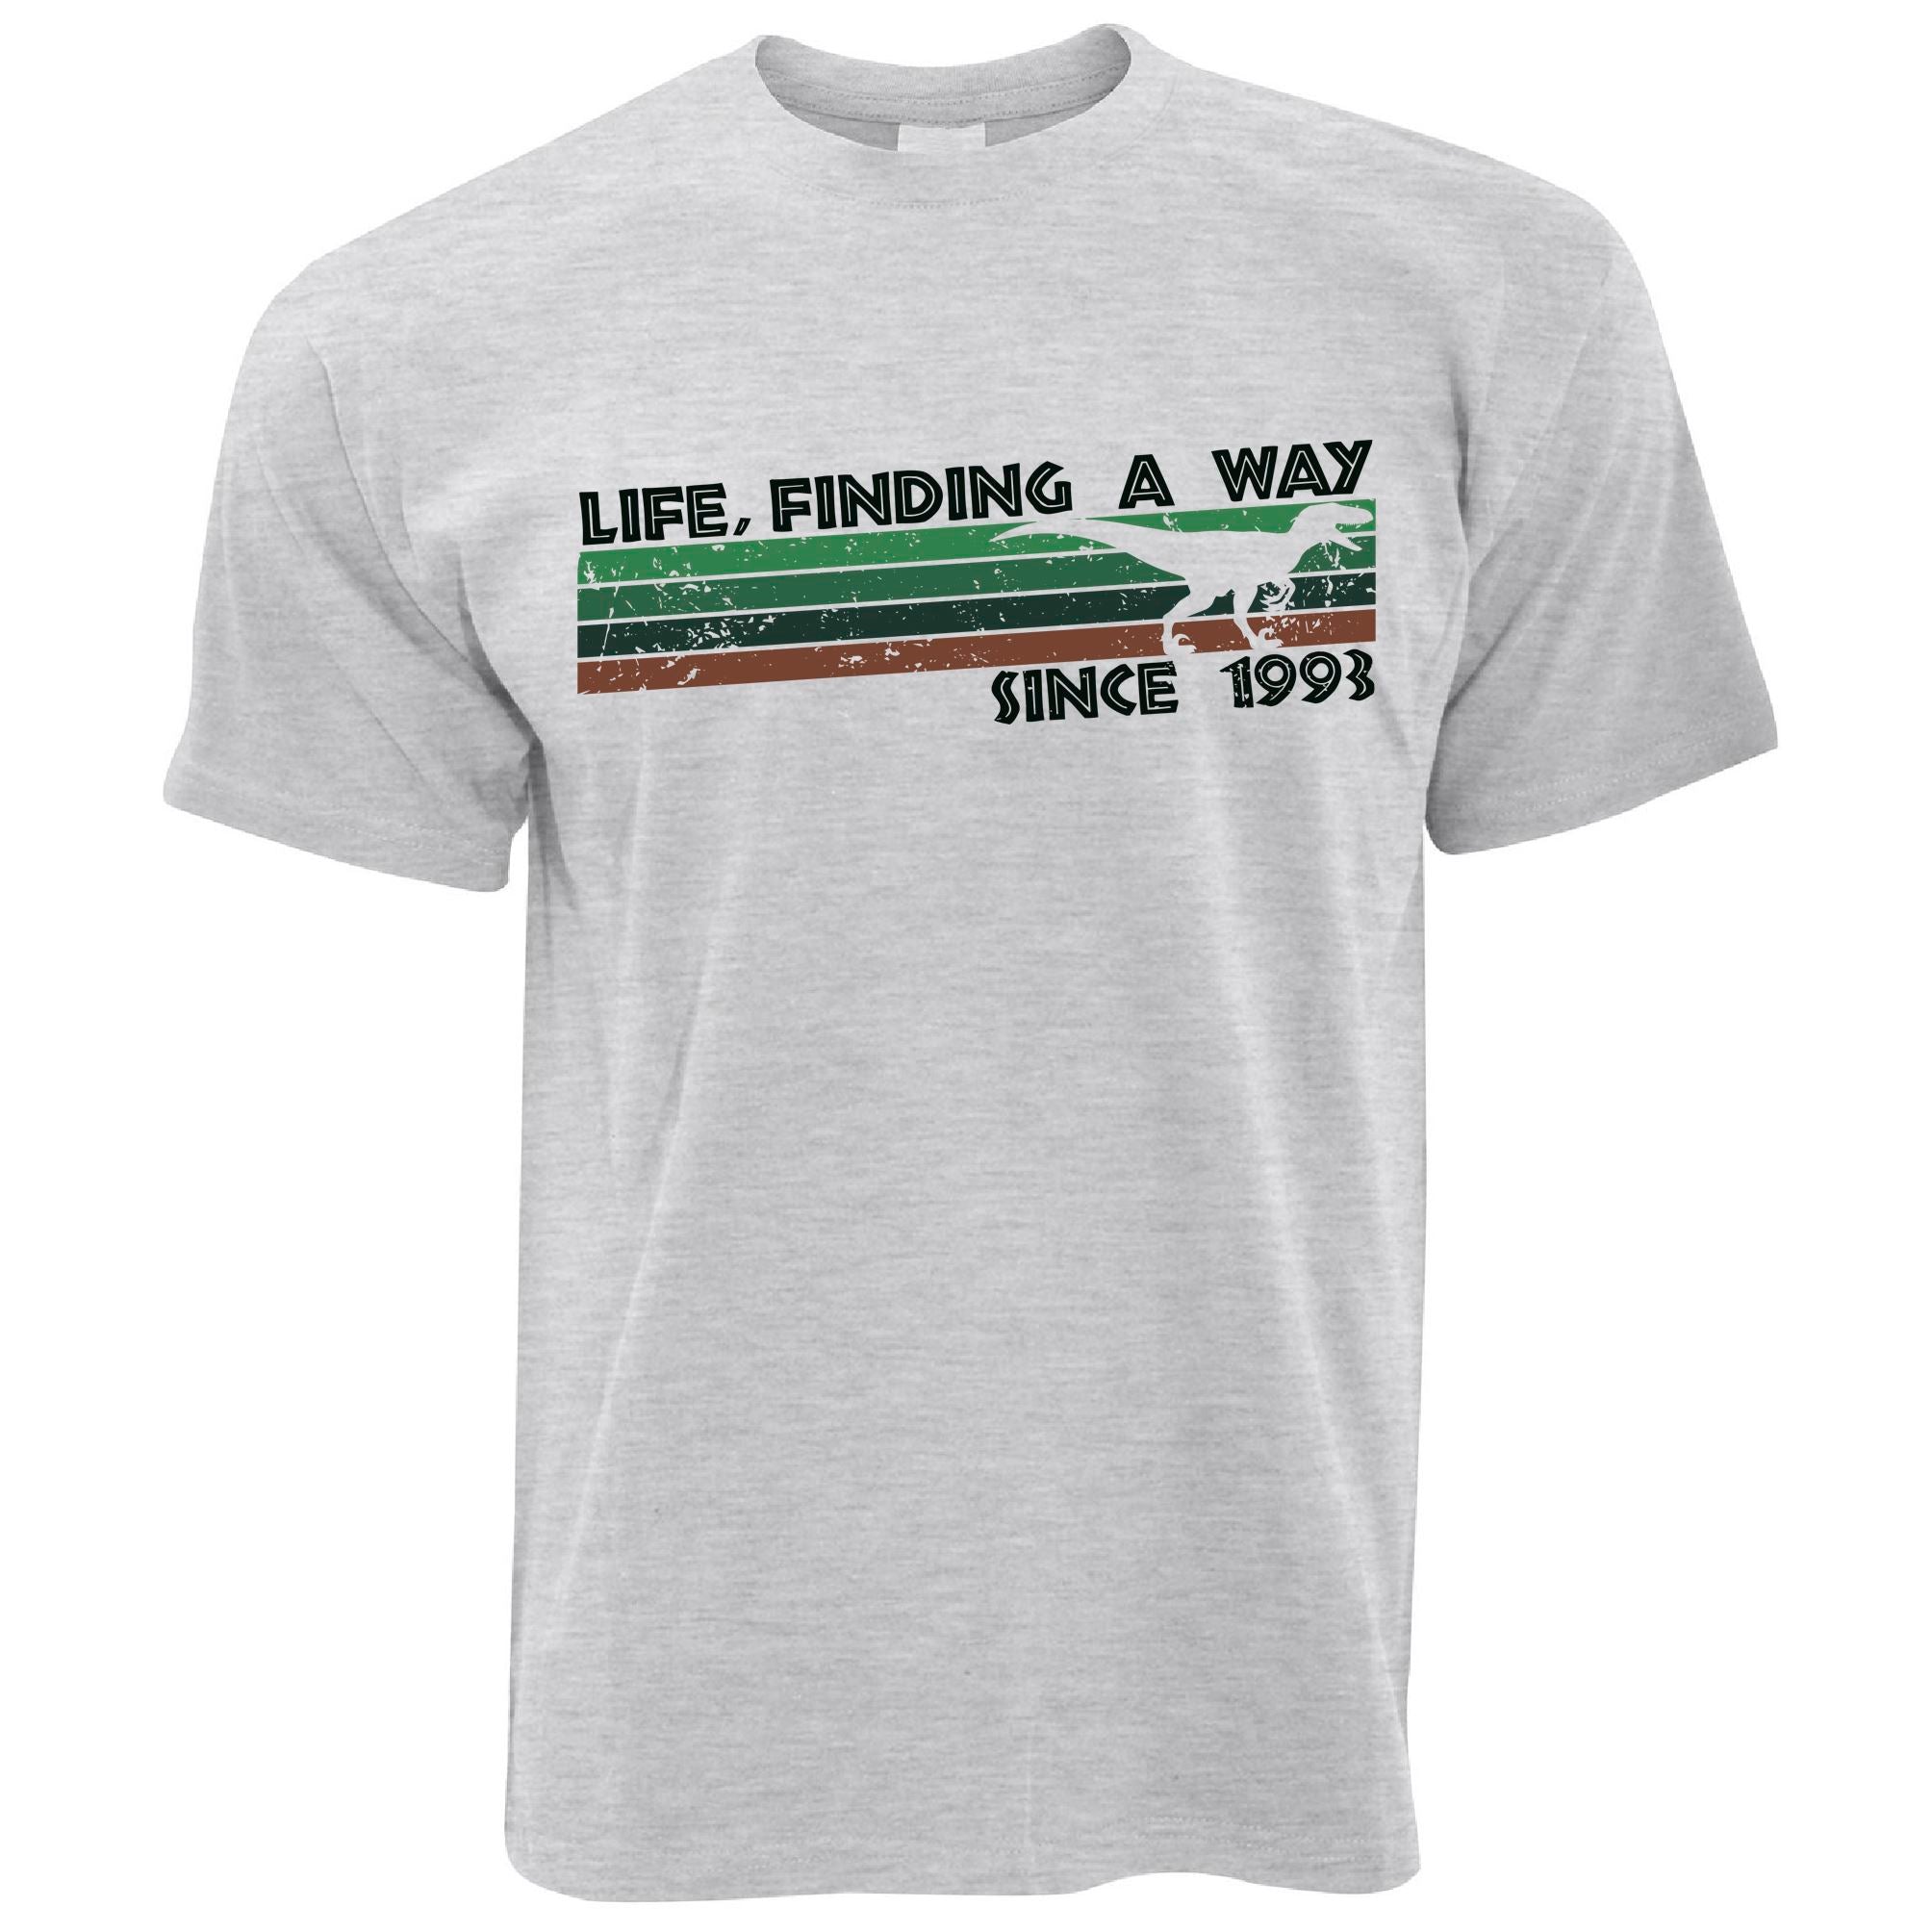 Life, Finding A Way Since 1993 T Shirt